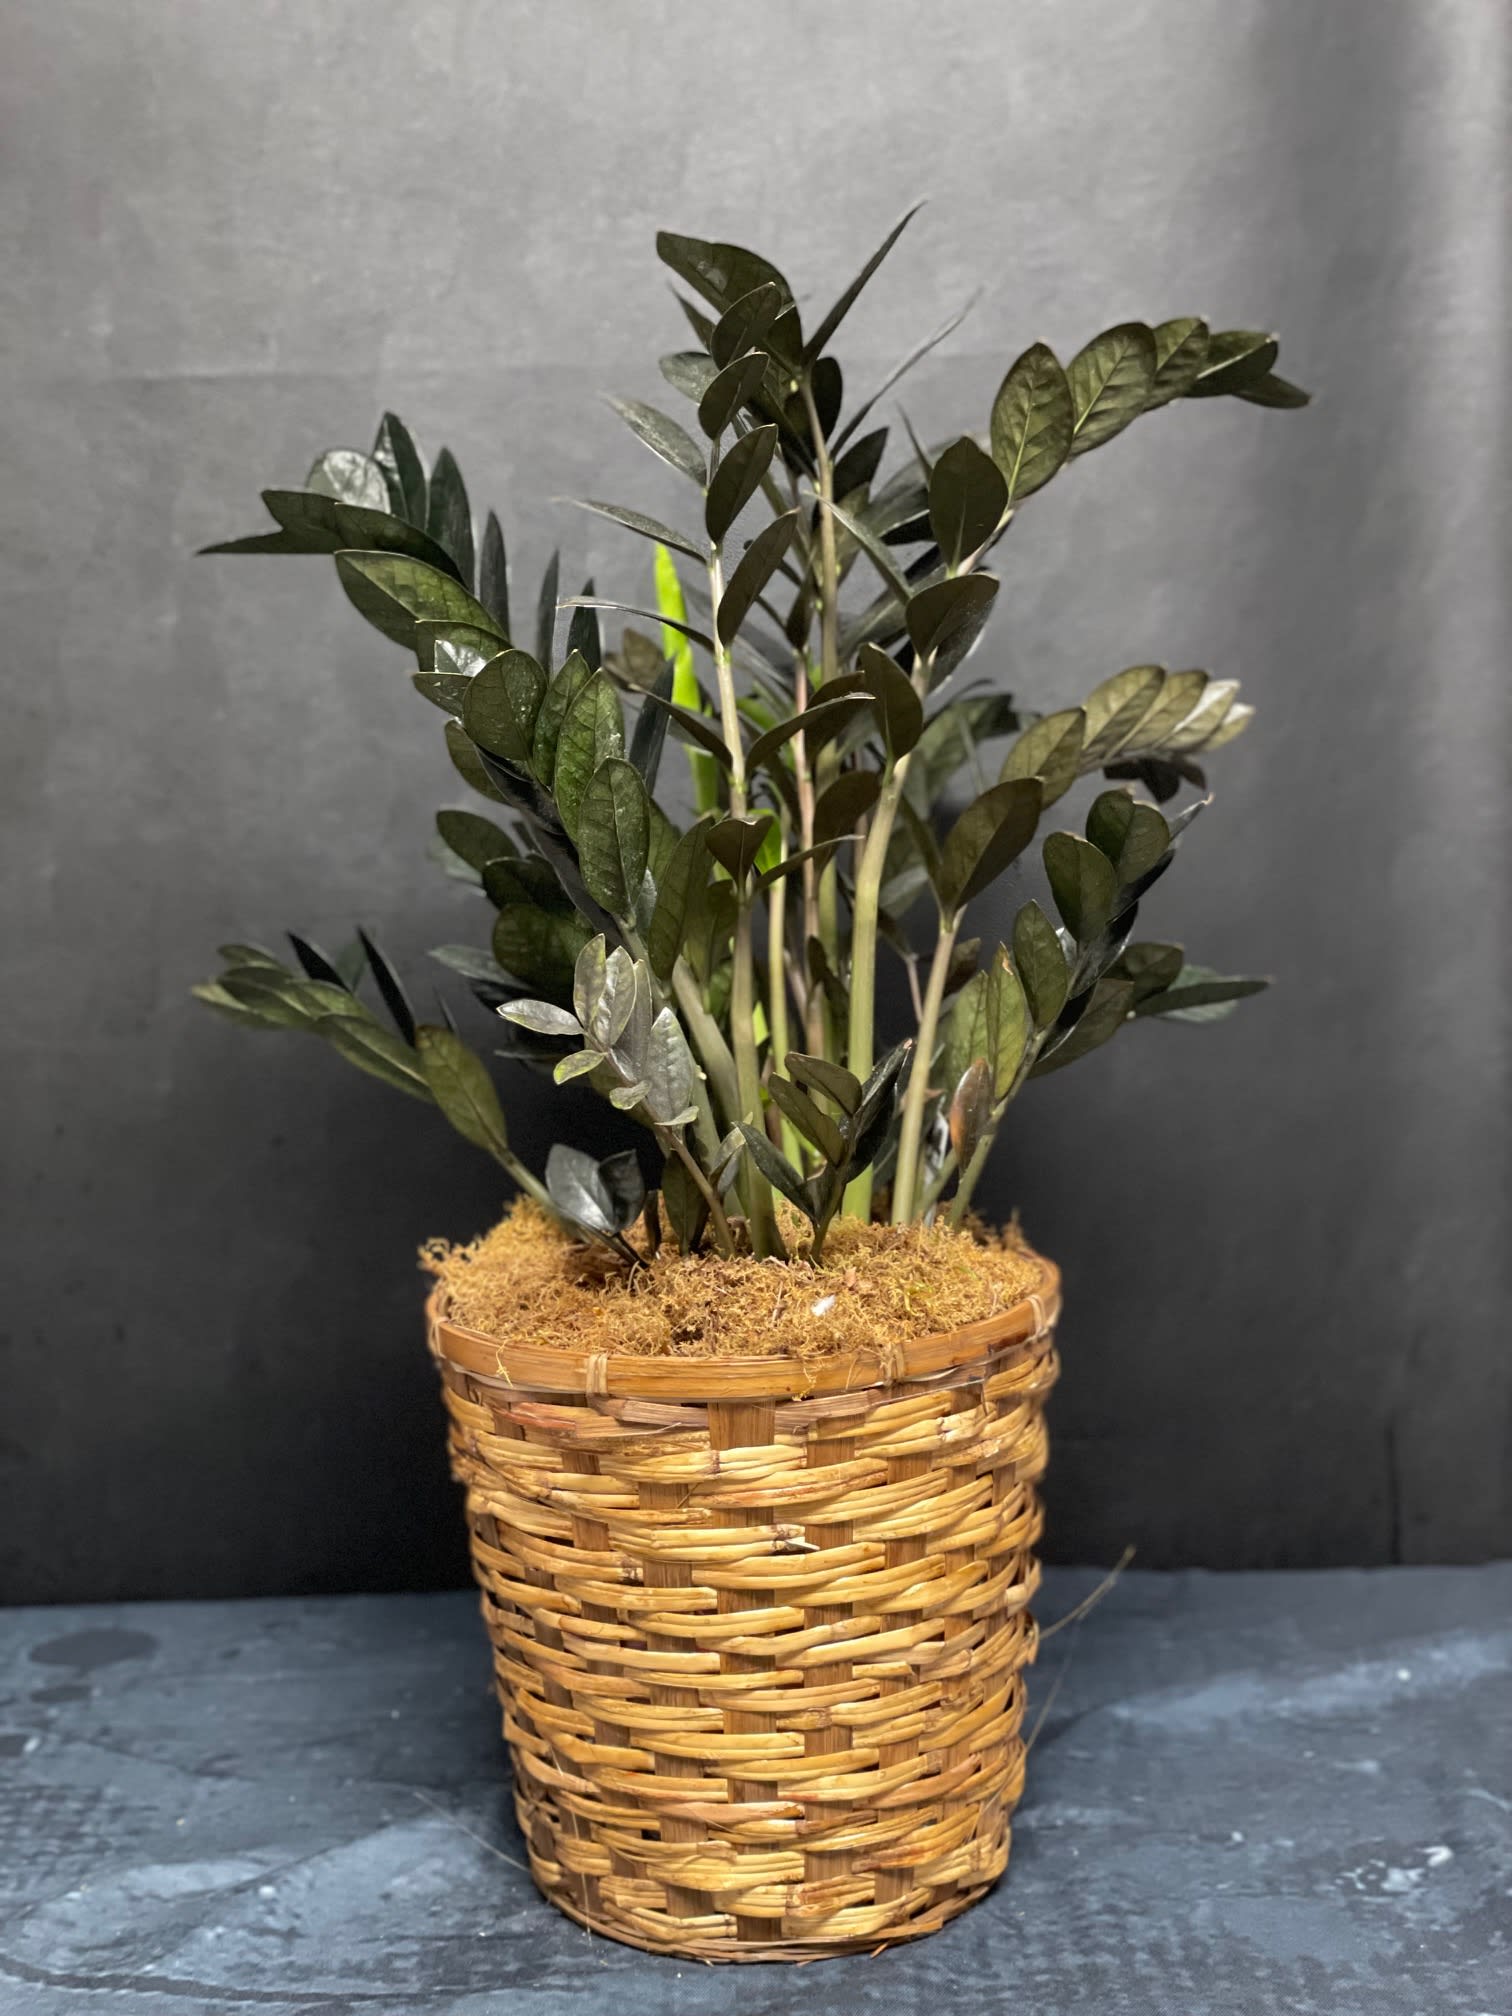 8&quot; Black ZZ plant - ZZ Raven leaves are the bright green color of an original ZZ when they first unfurl. Over time, those green leaves will turn into black foliage.